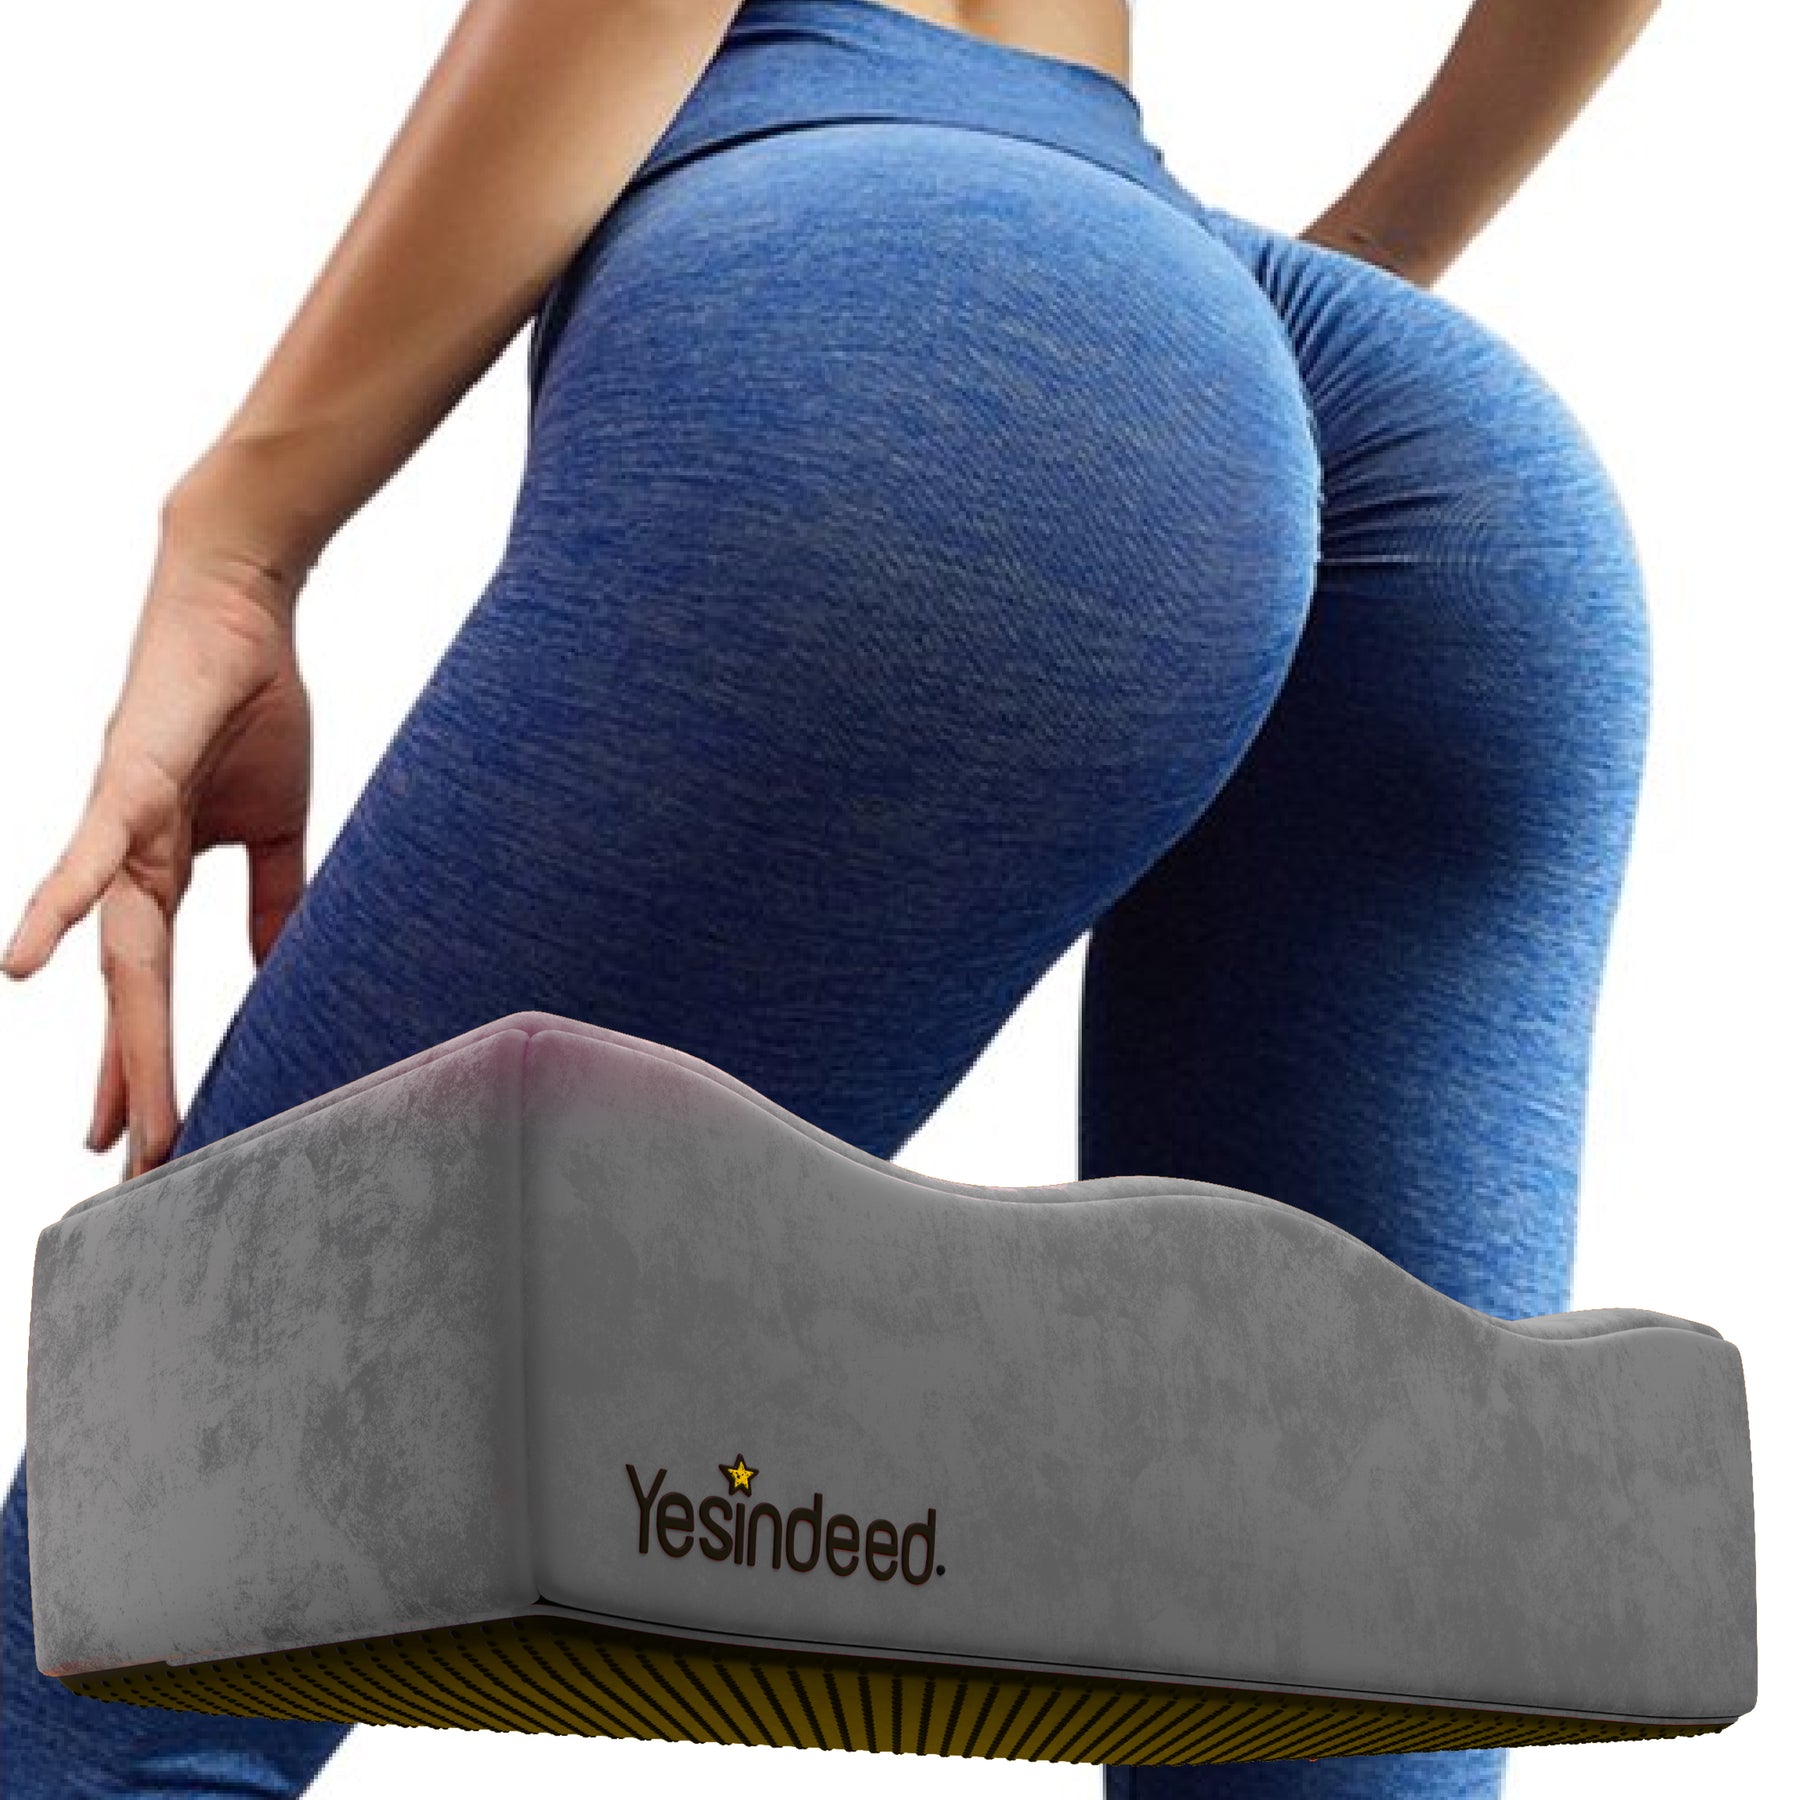 Yesindeed The Original Brazilian Butt Lift Pillow – Dr. Approved for Post Surgery Recovery Seat – BBL Foam Pillow + Cover Bag Firm Support Cushion